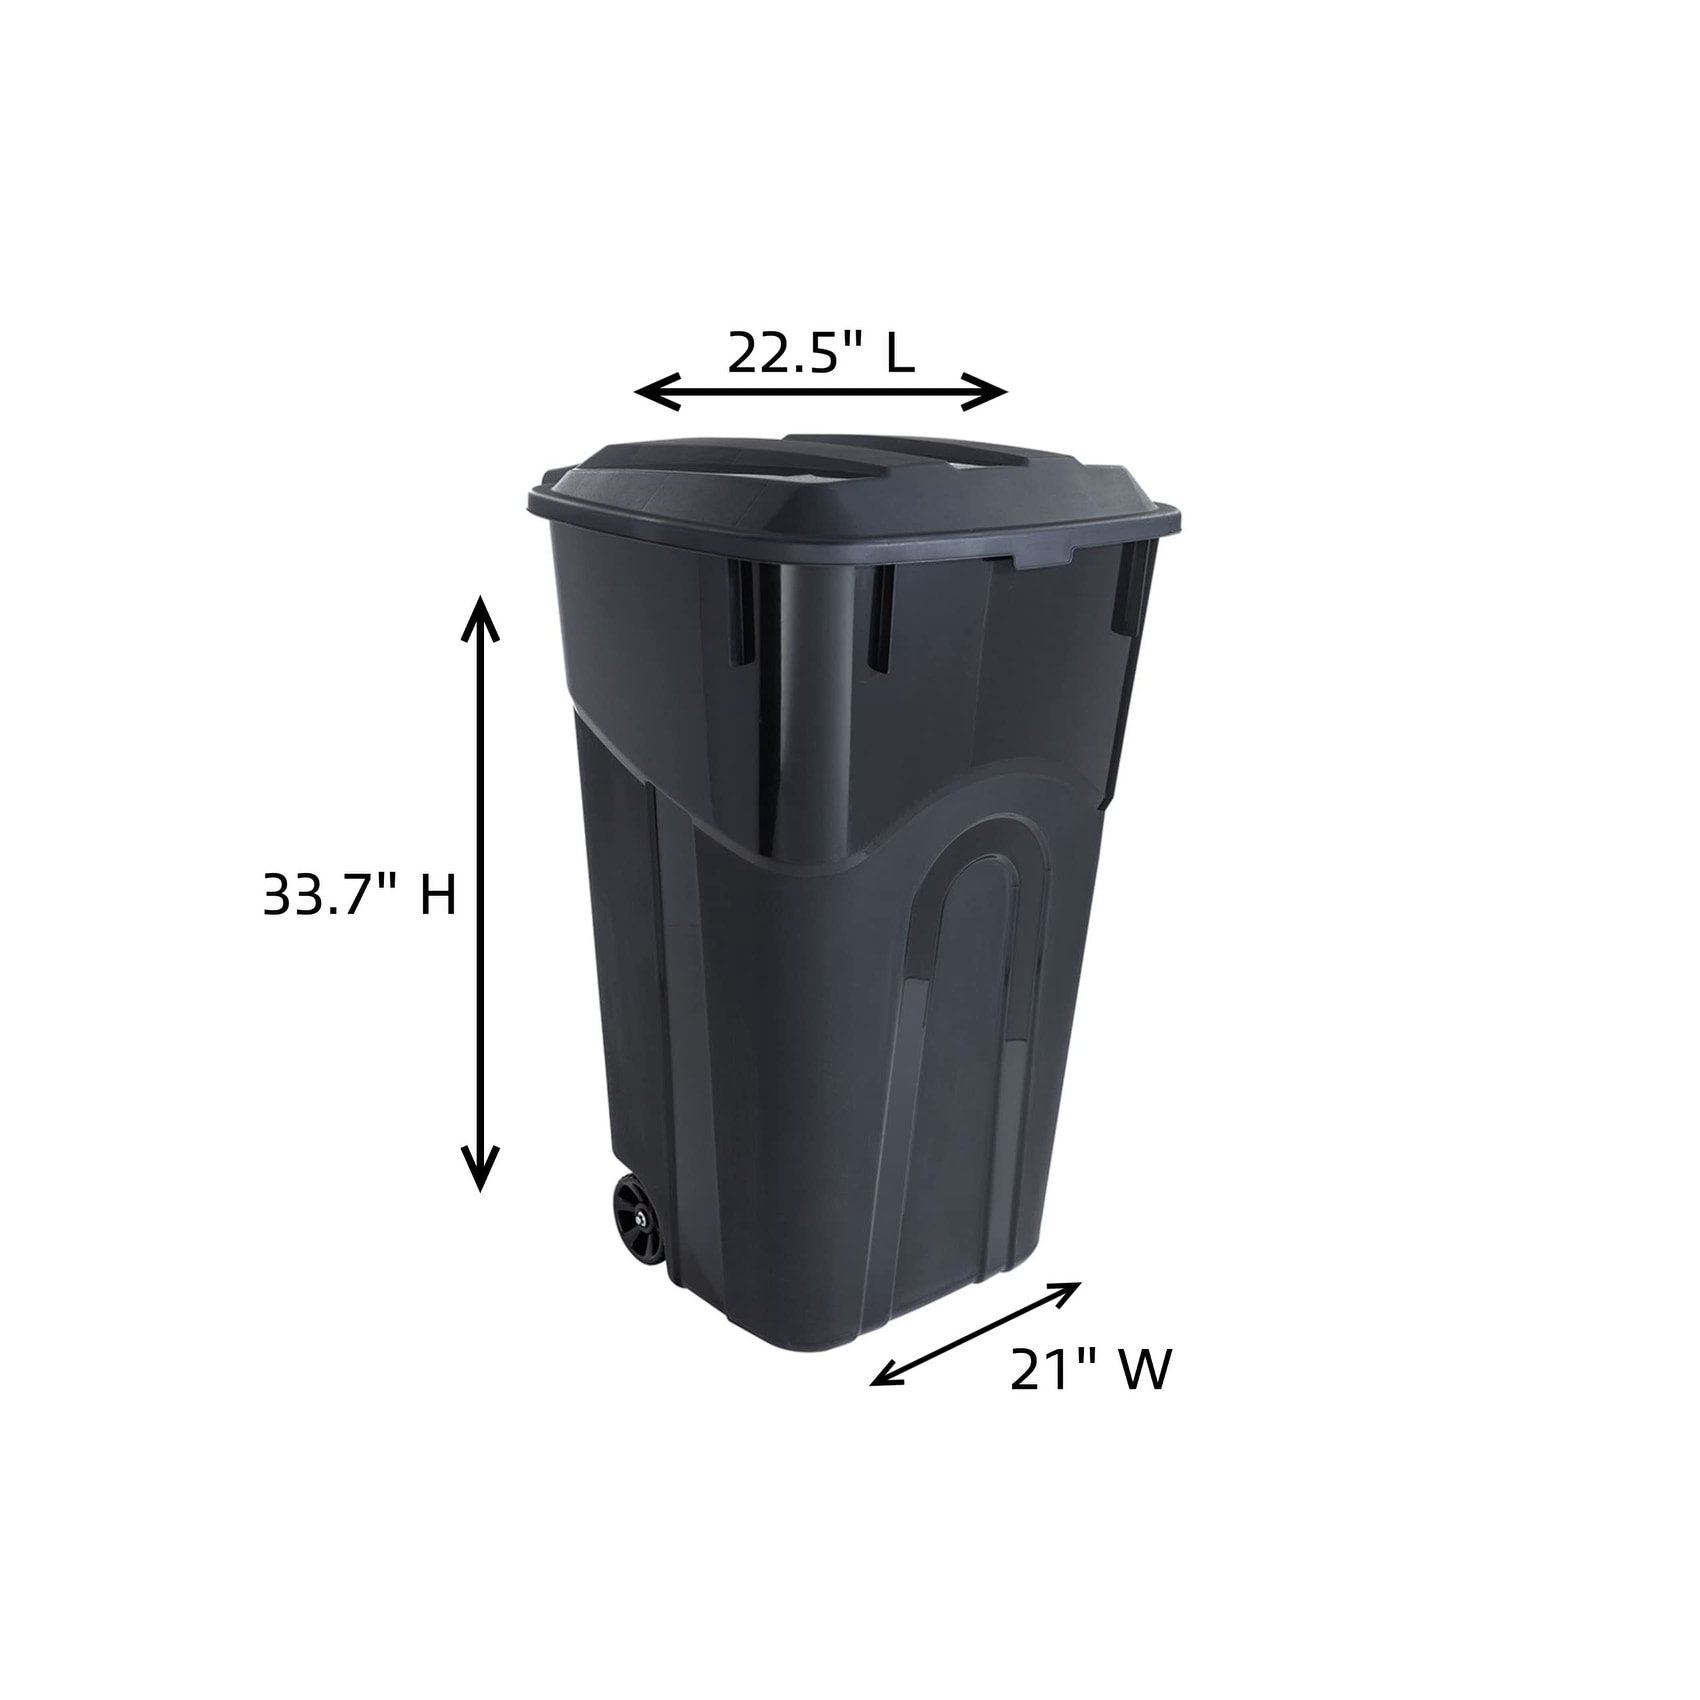 https://ak1.ostkcdn.com/images/products/is/images/direct/6c6cfb889b4b773dd4d853f479fc7900d13eb0bc/32-Gallon-Wheeled-Outdoor-Garbage-Can-with-Attached-Snap-Lock-Lid-and-Handles%2C-Perfect-Backyard%2C-Deck%2C-or-Garage-Trash-Can%2C-2pcs.jpg